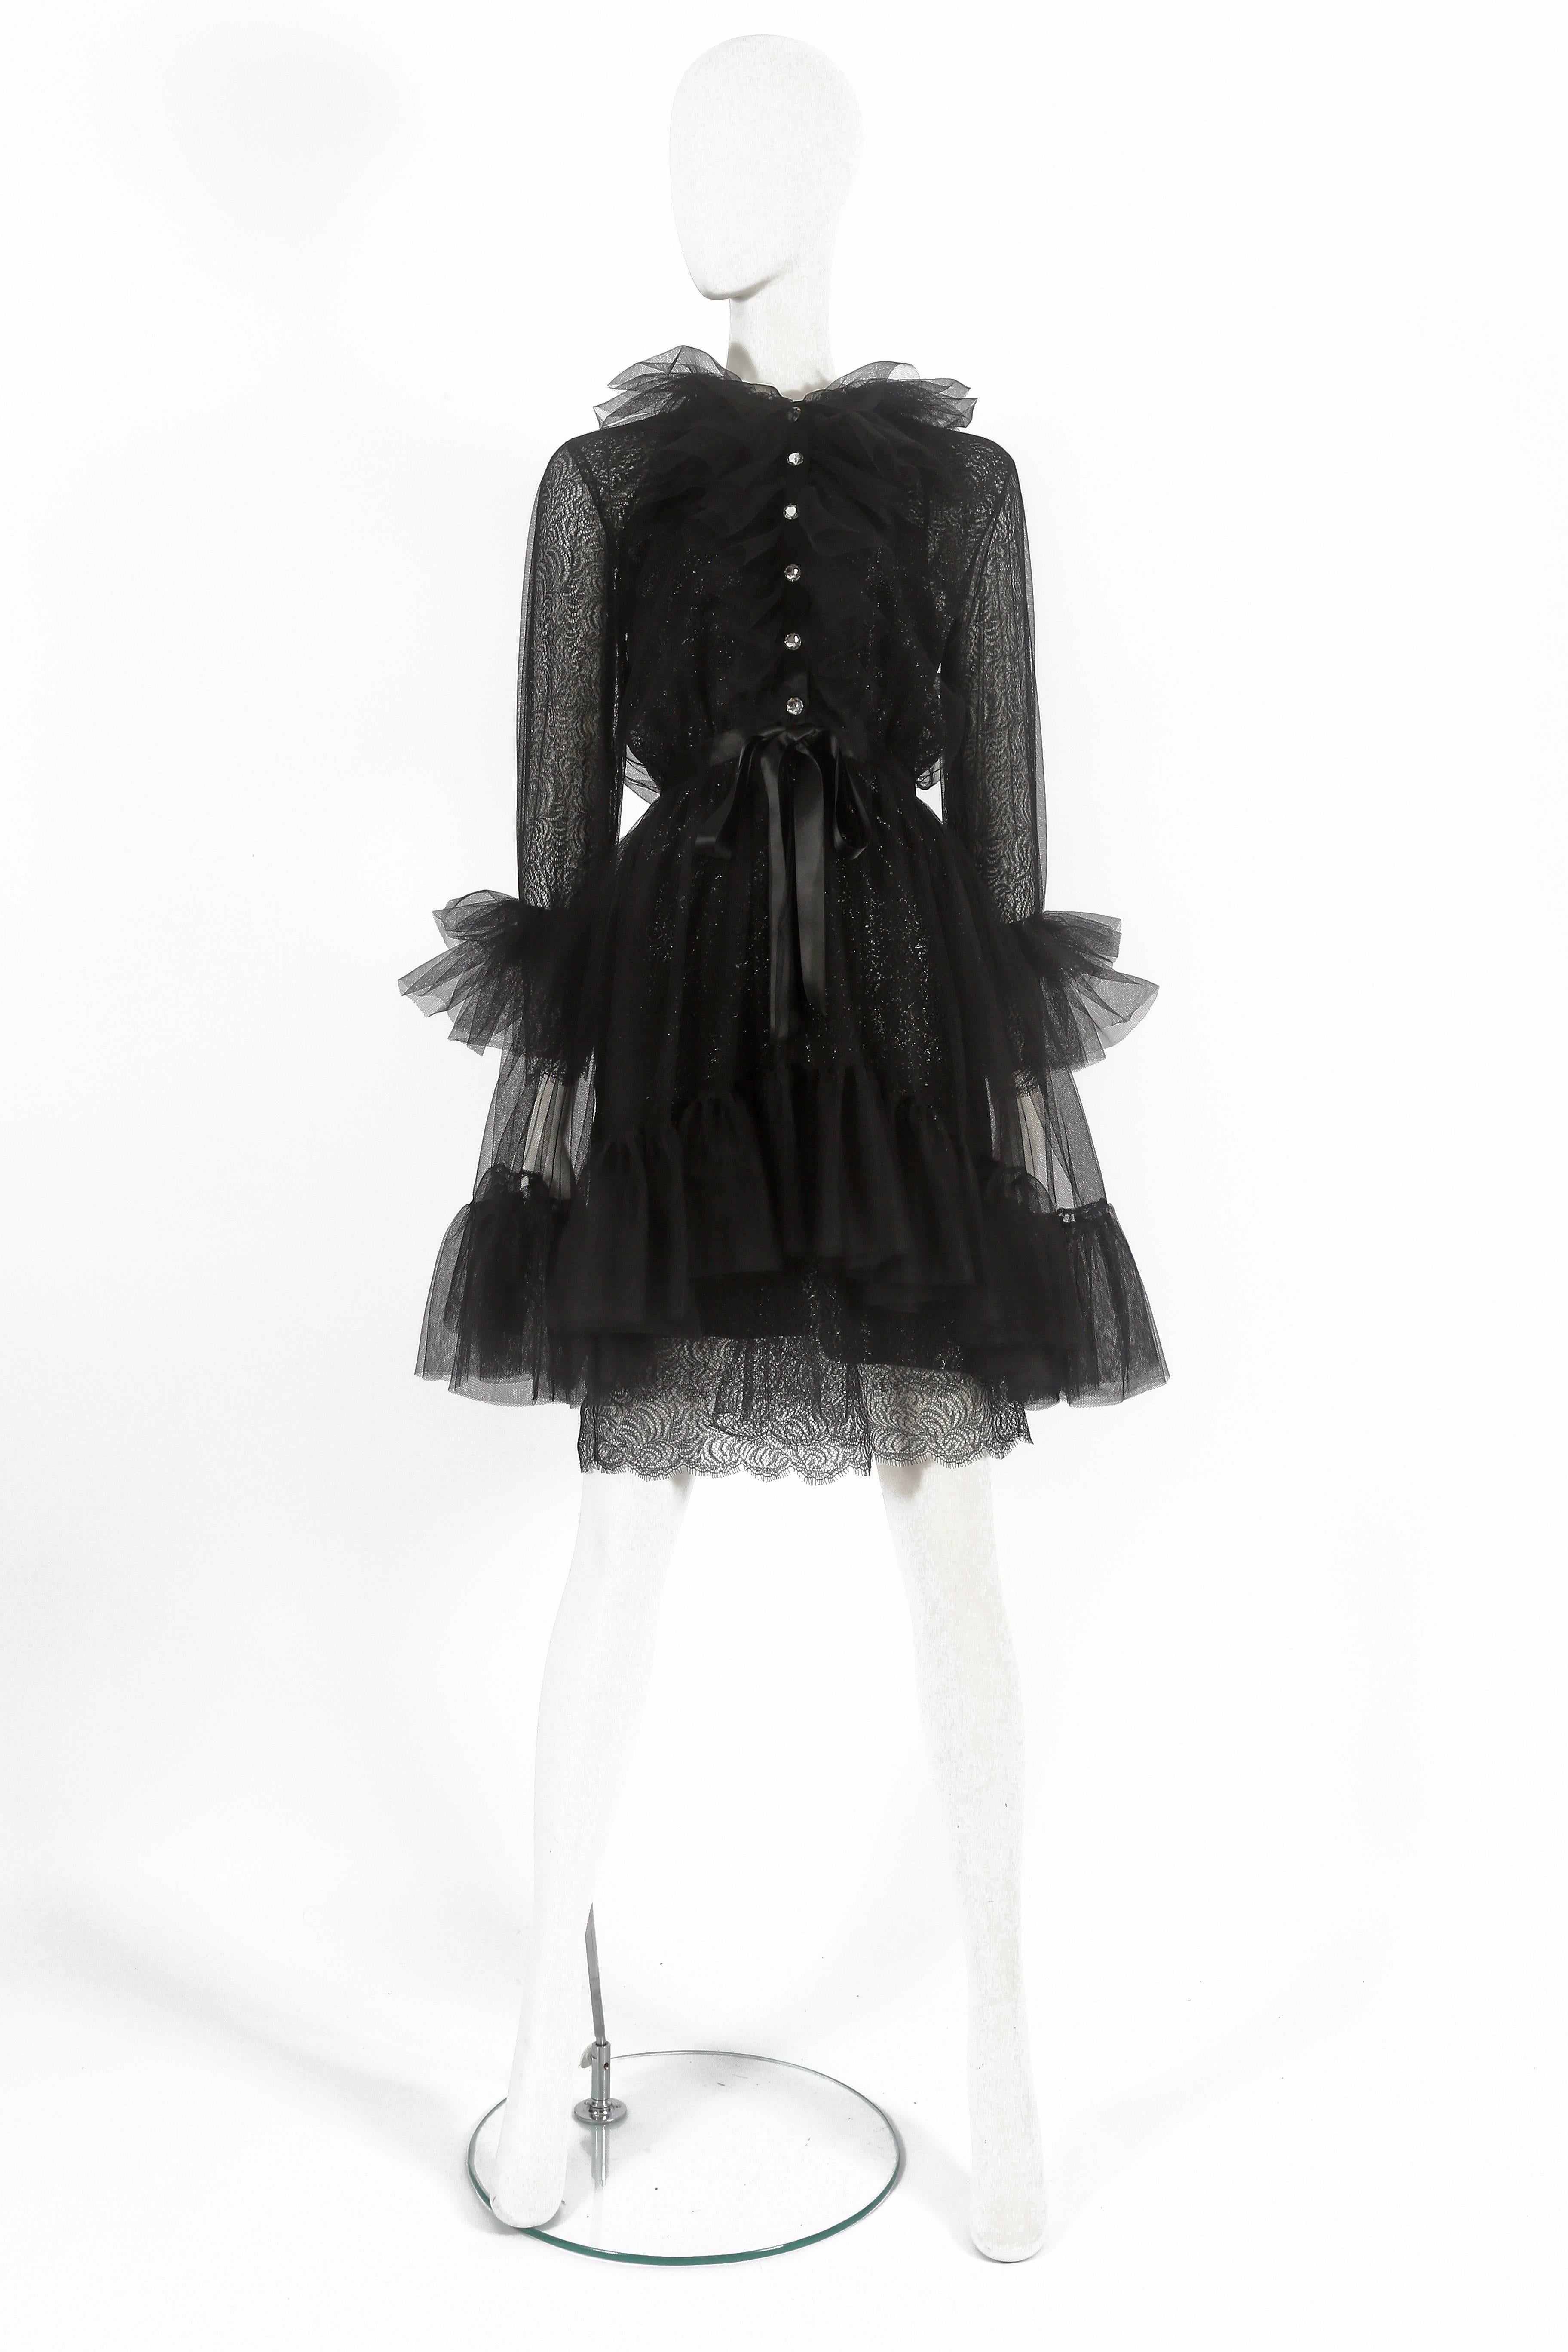 Exquisite and rare Yves Saint Laurent cocktail dress, circa 1980. The dress features two layers of lace, tulle overlayer with ruffled skirt, cuffs and collar, rhinestone buttons, silk bow fastening and attachable silk slip. 